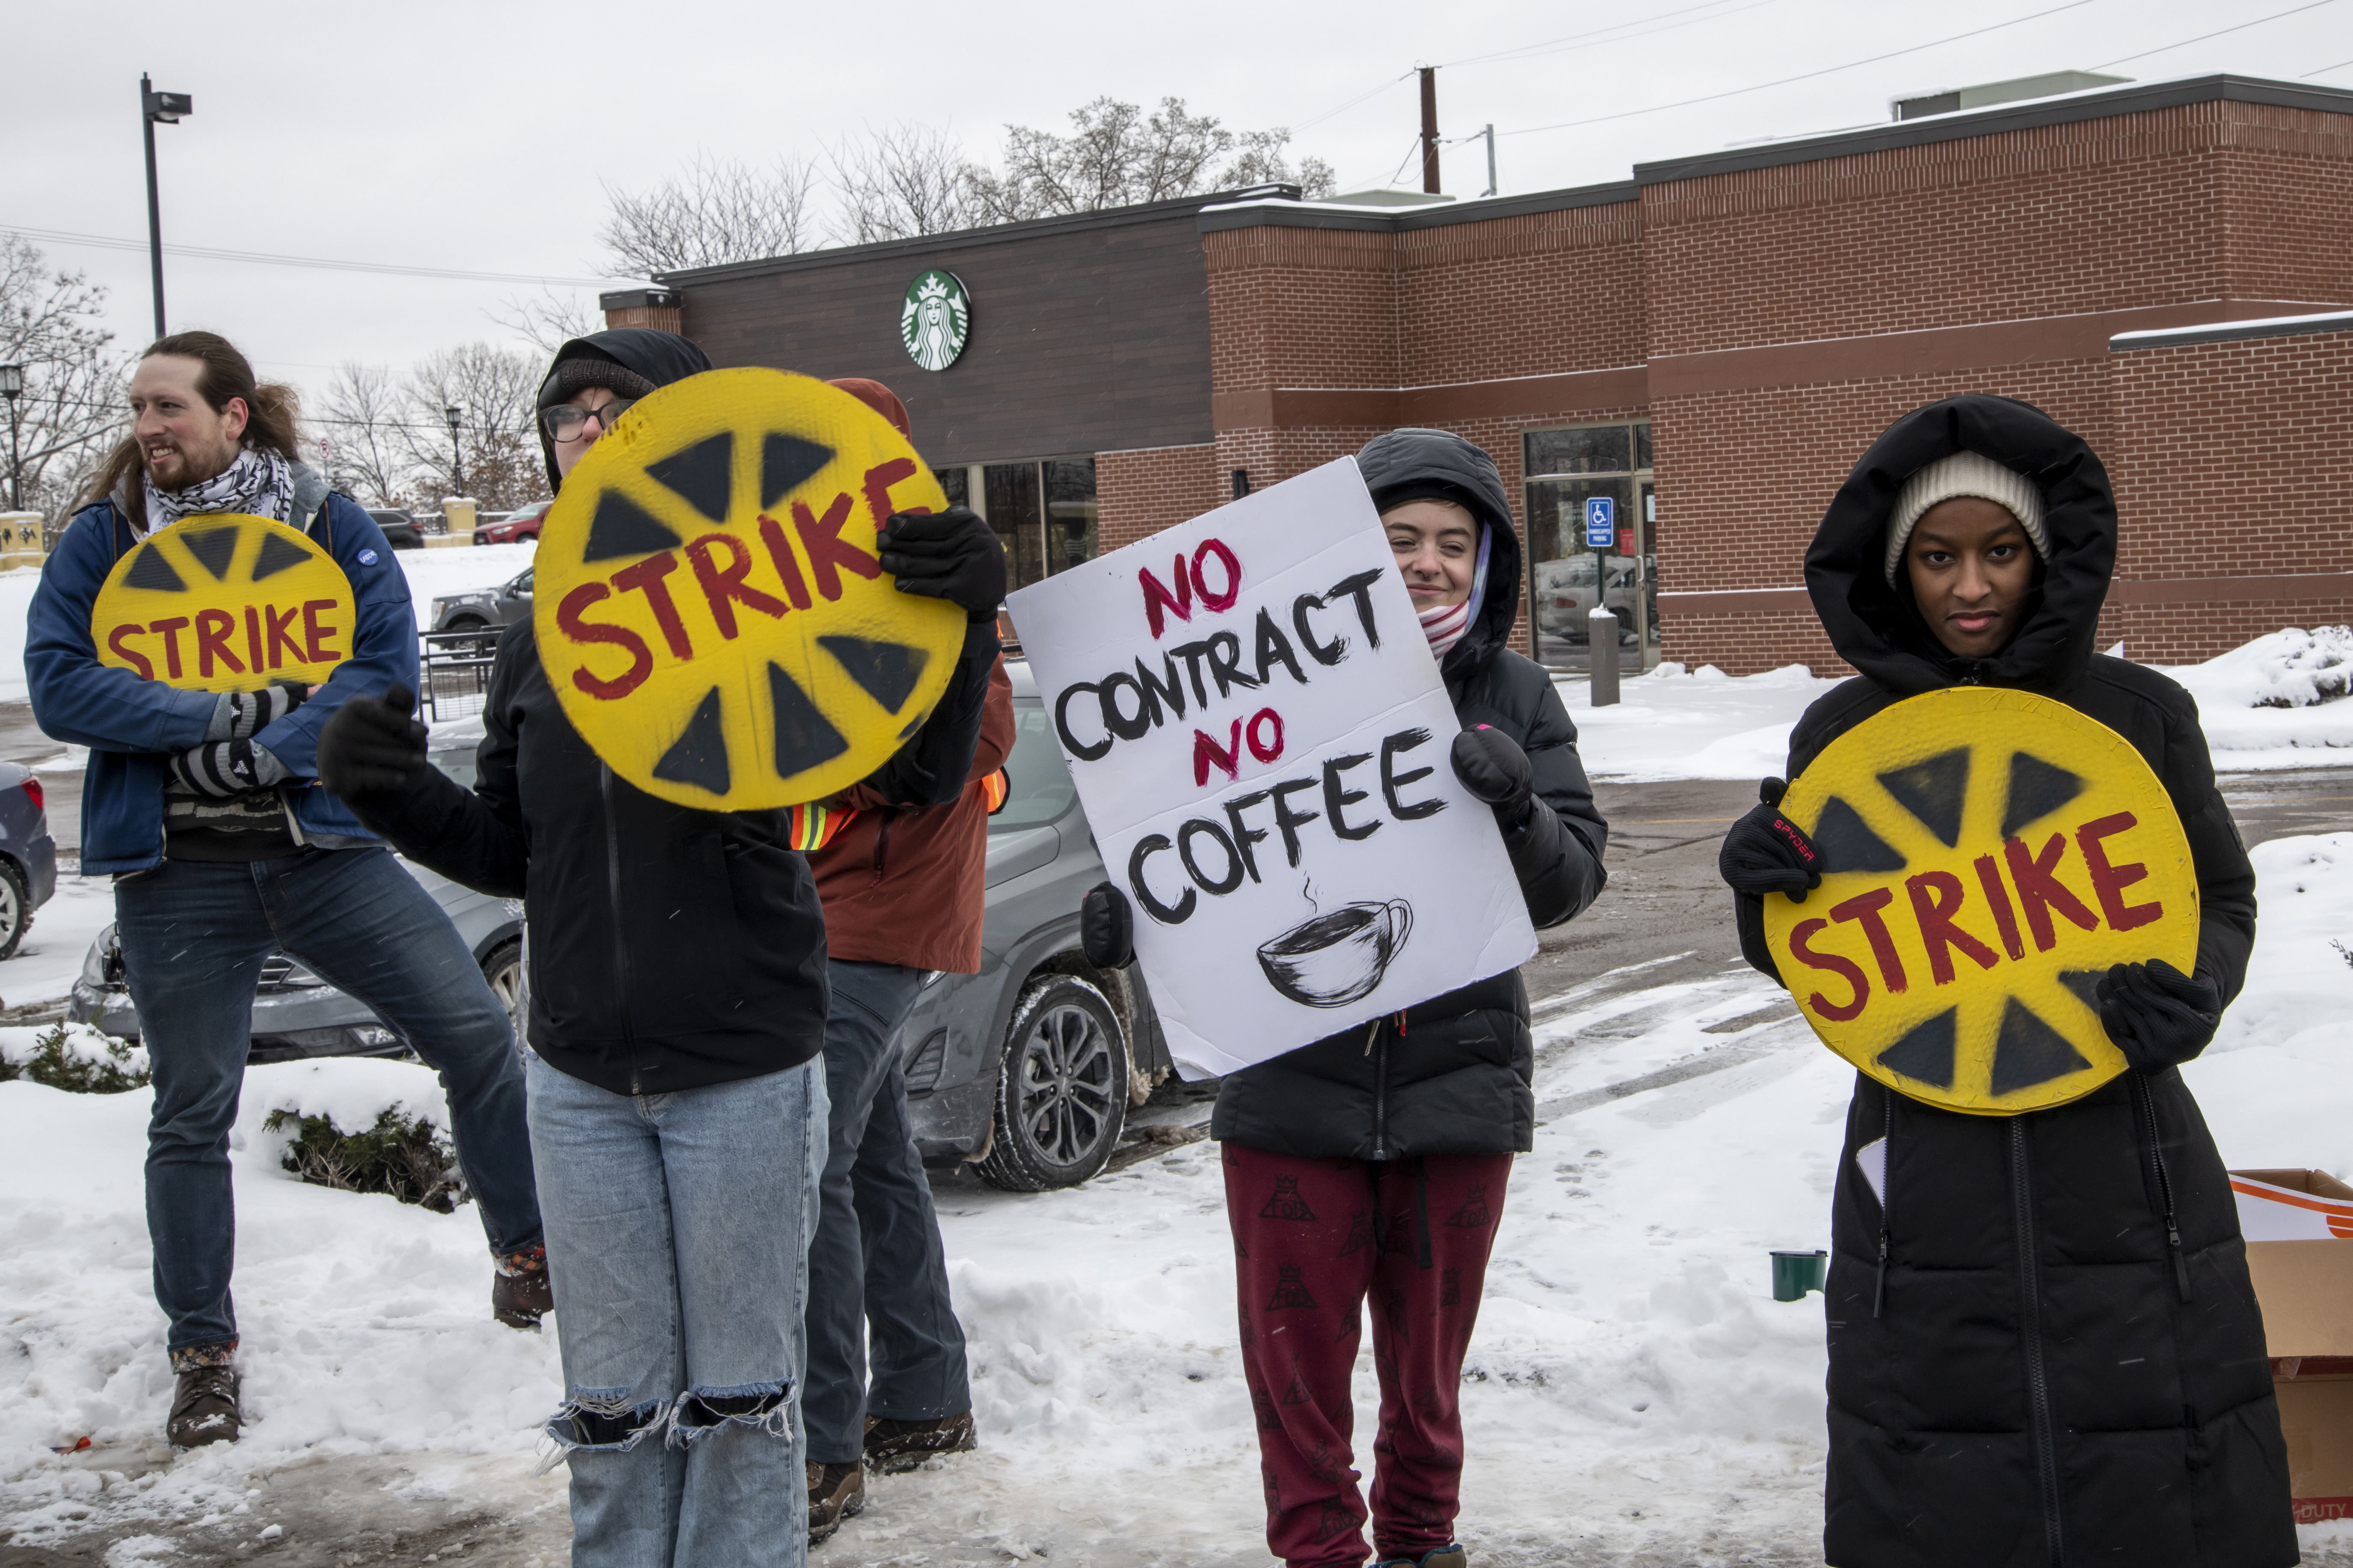 St. Anthony, Minnesota, Starbucks workers across the country strike to protest unfair labor practices and union busting going on at the company. Workers complain they are closing stores and short-staffing.